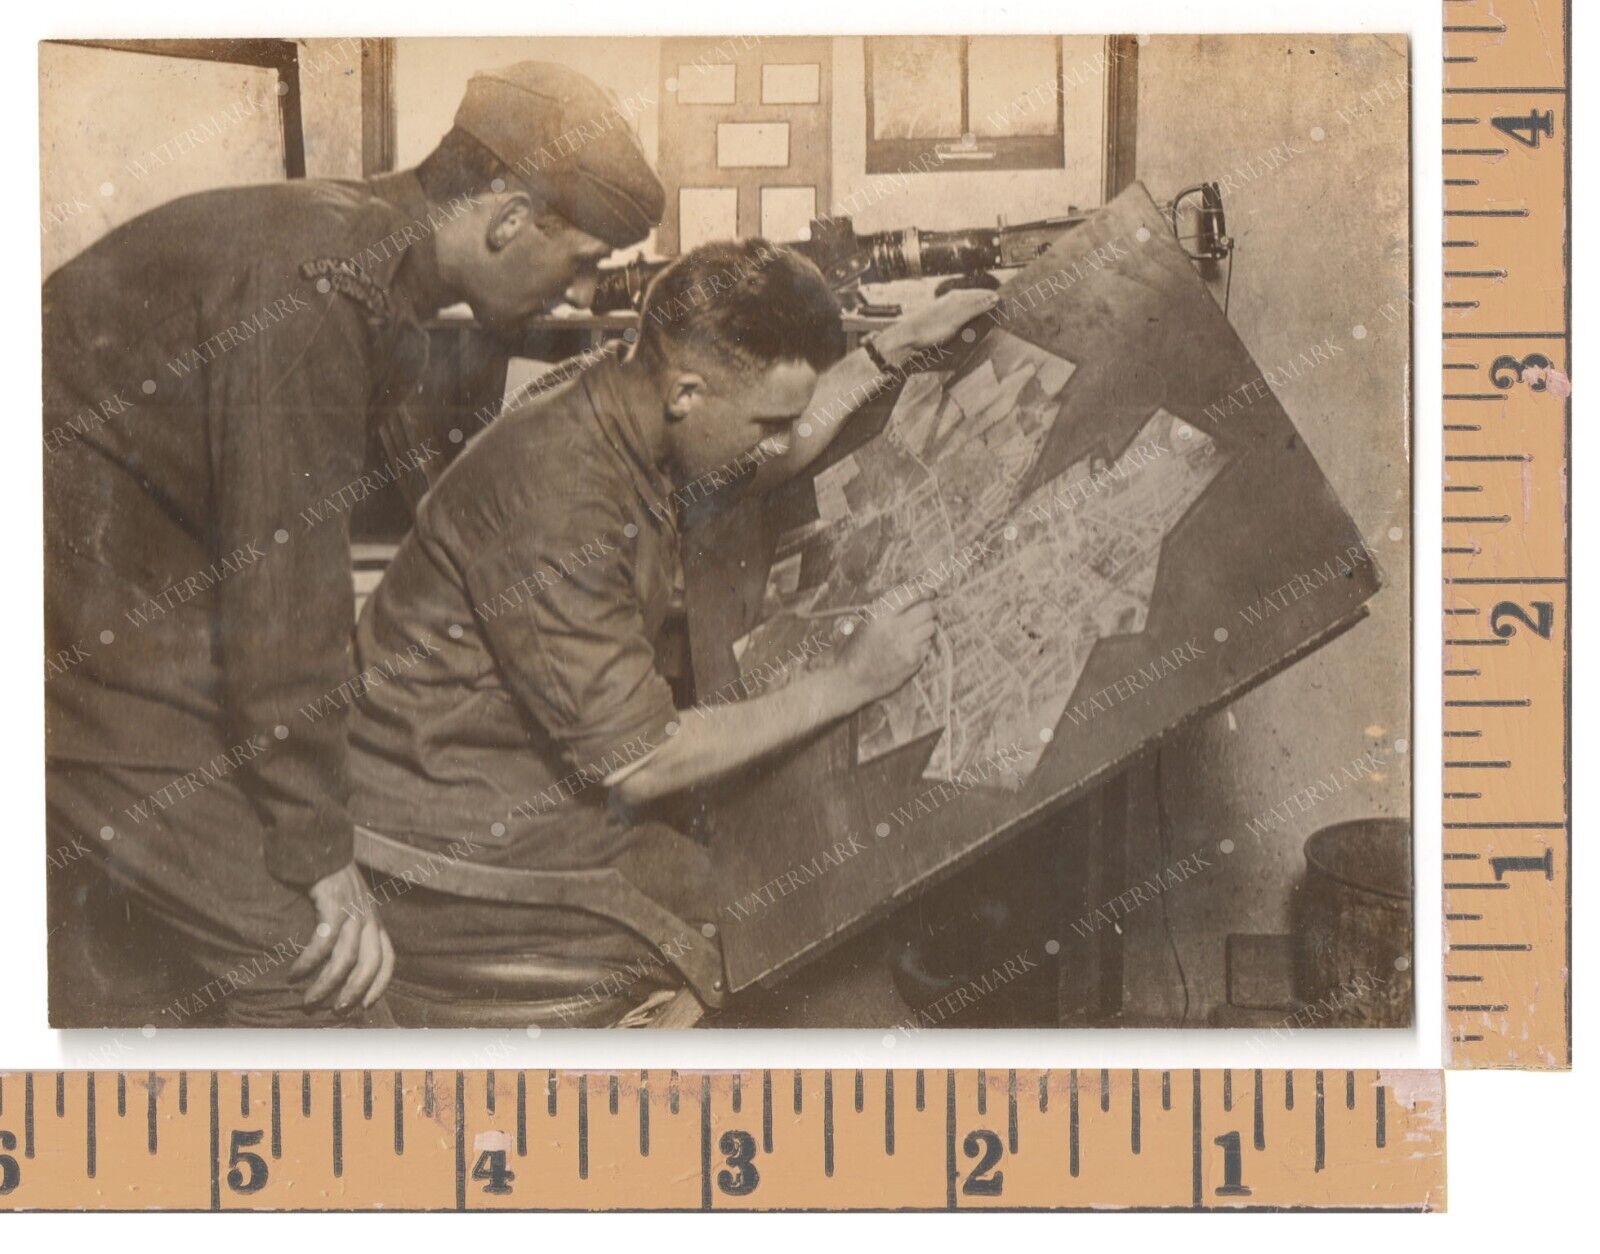 WWI 1914 Original Photo of BRITISH ROYAL FLYING CORPS AERIAL MAPPING & TARGETING